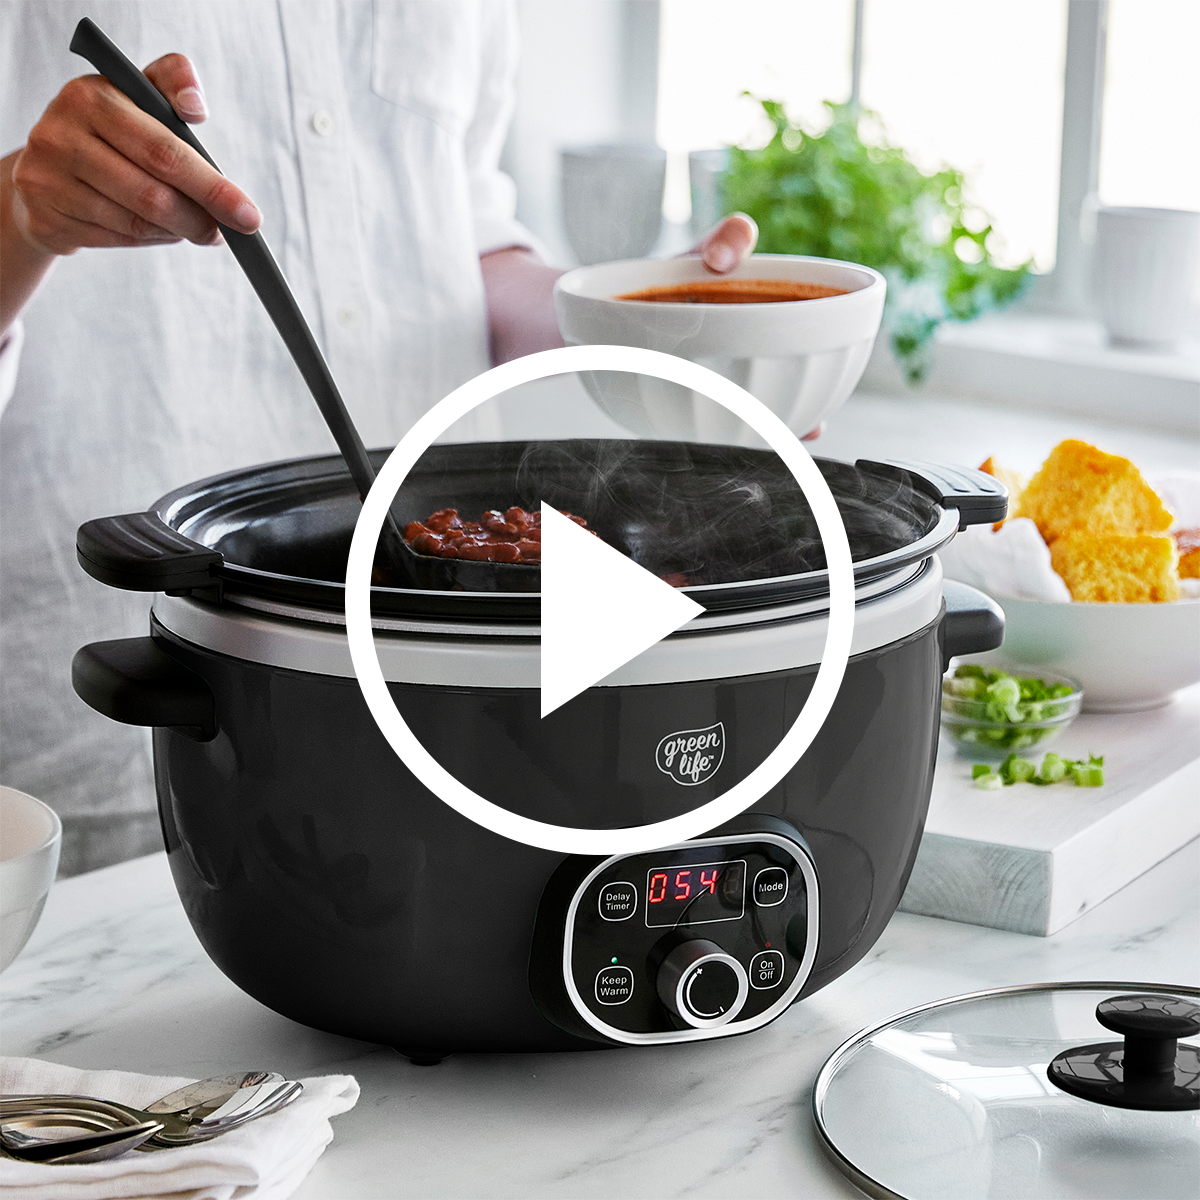 Healthy & Green Slow Cooking with a Slow Cooker Made in USA